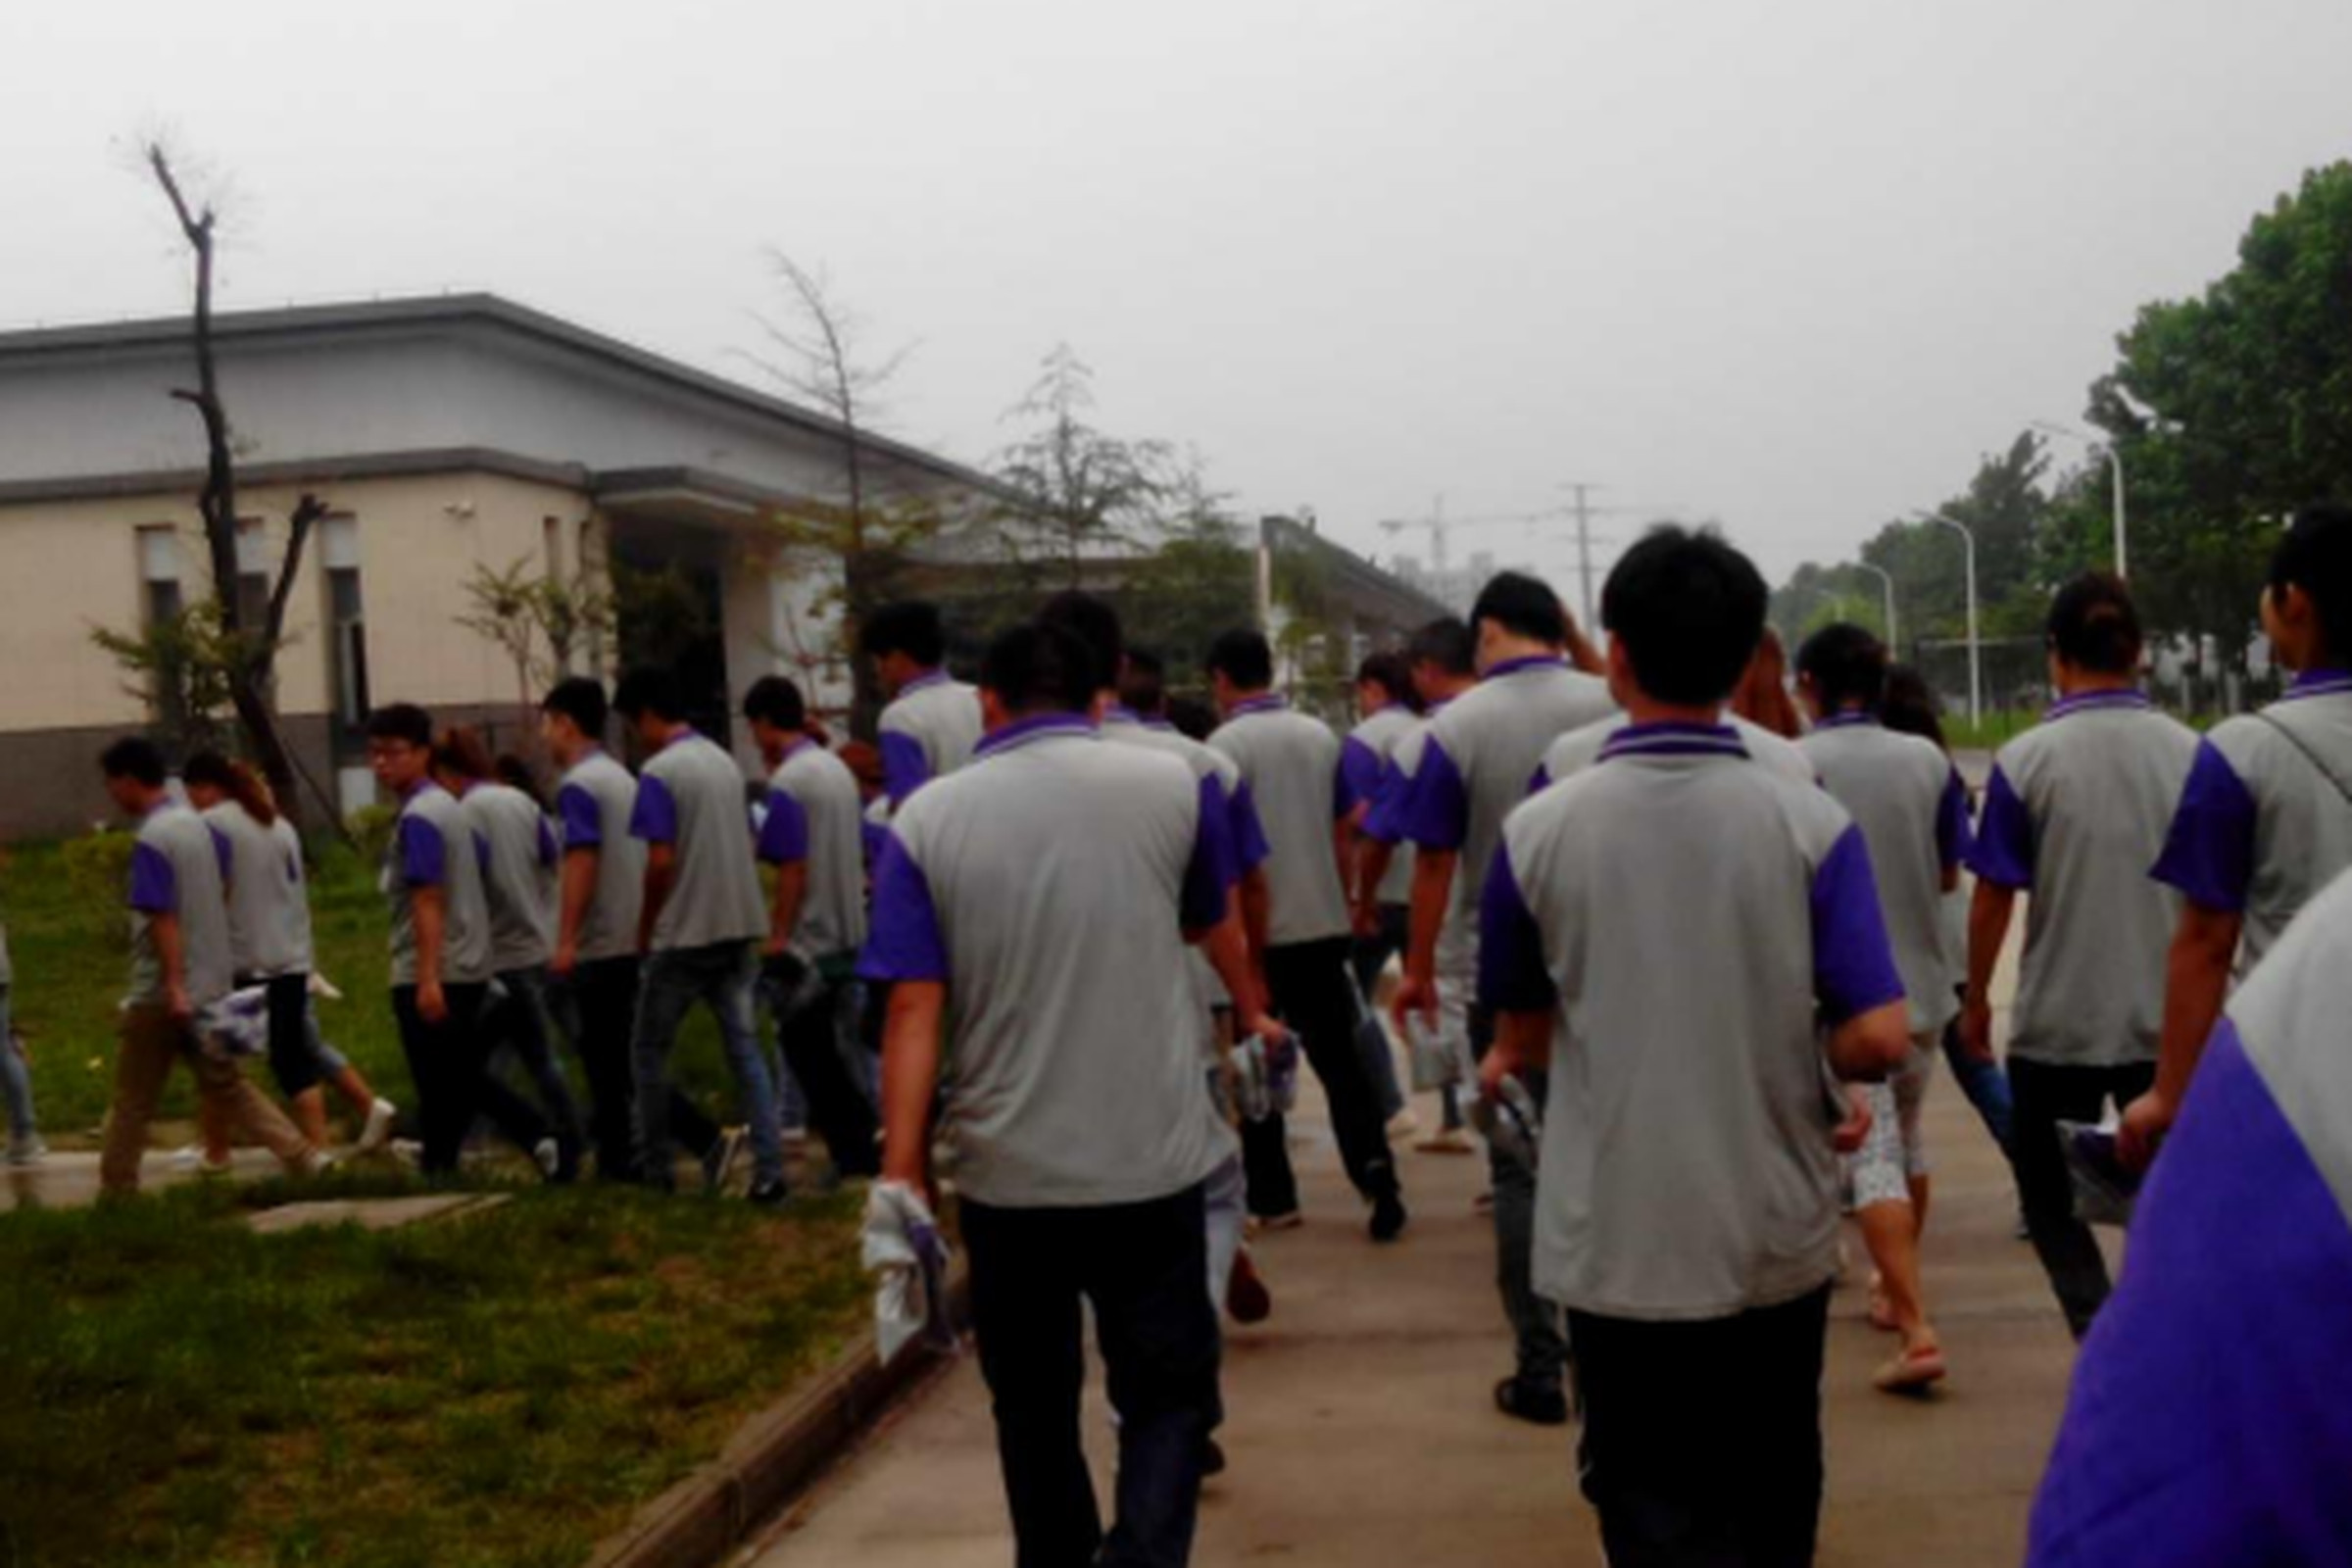 Workers in Suqian, China, assemble at a Catcher Technology factory accused of labor rights violations